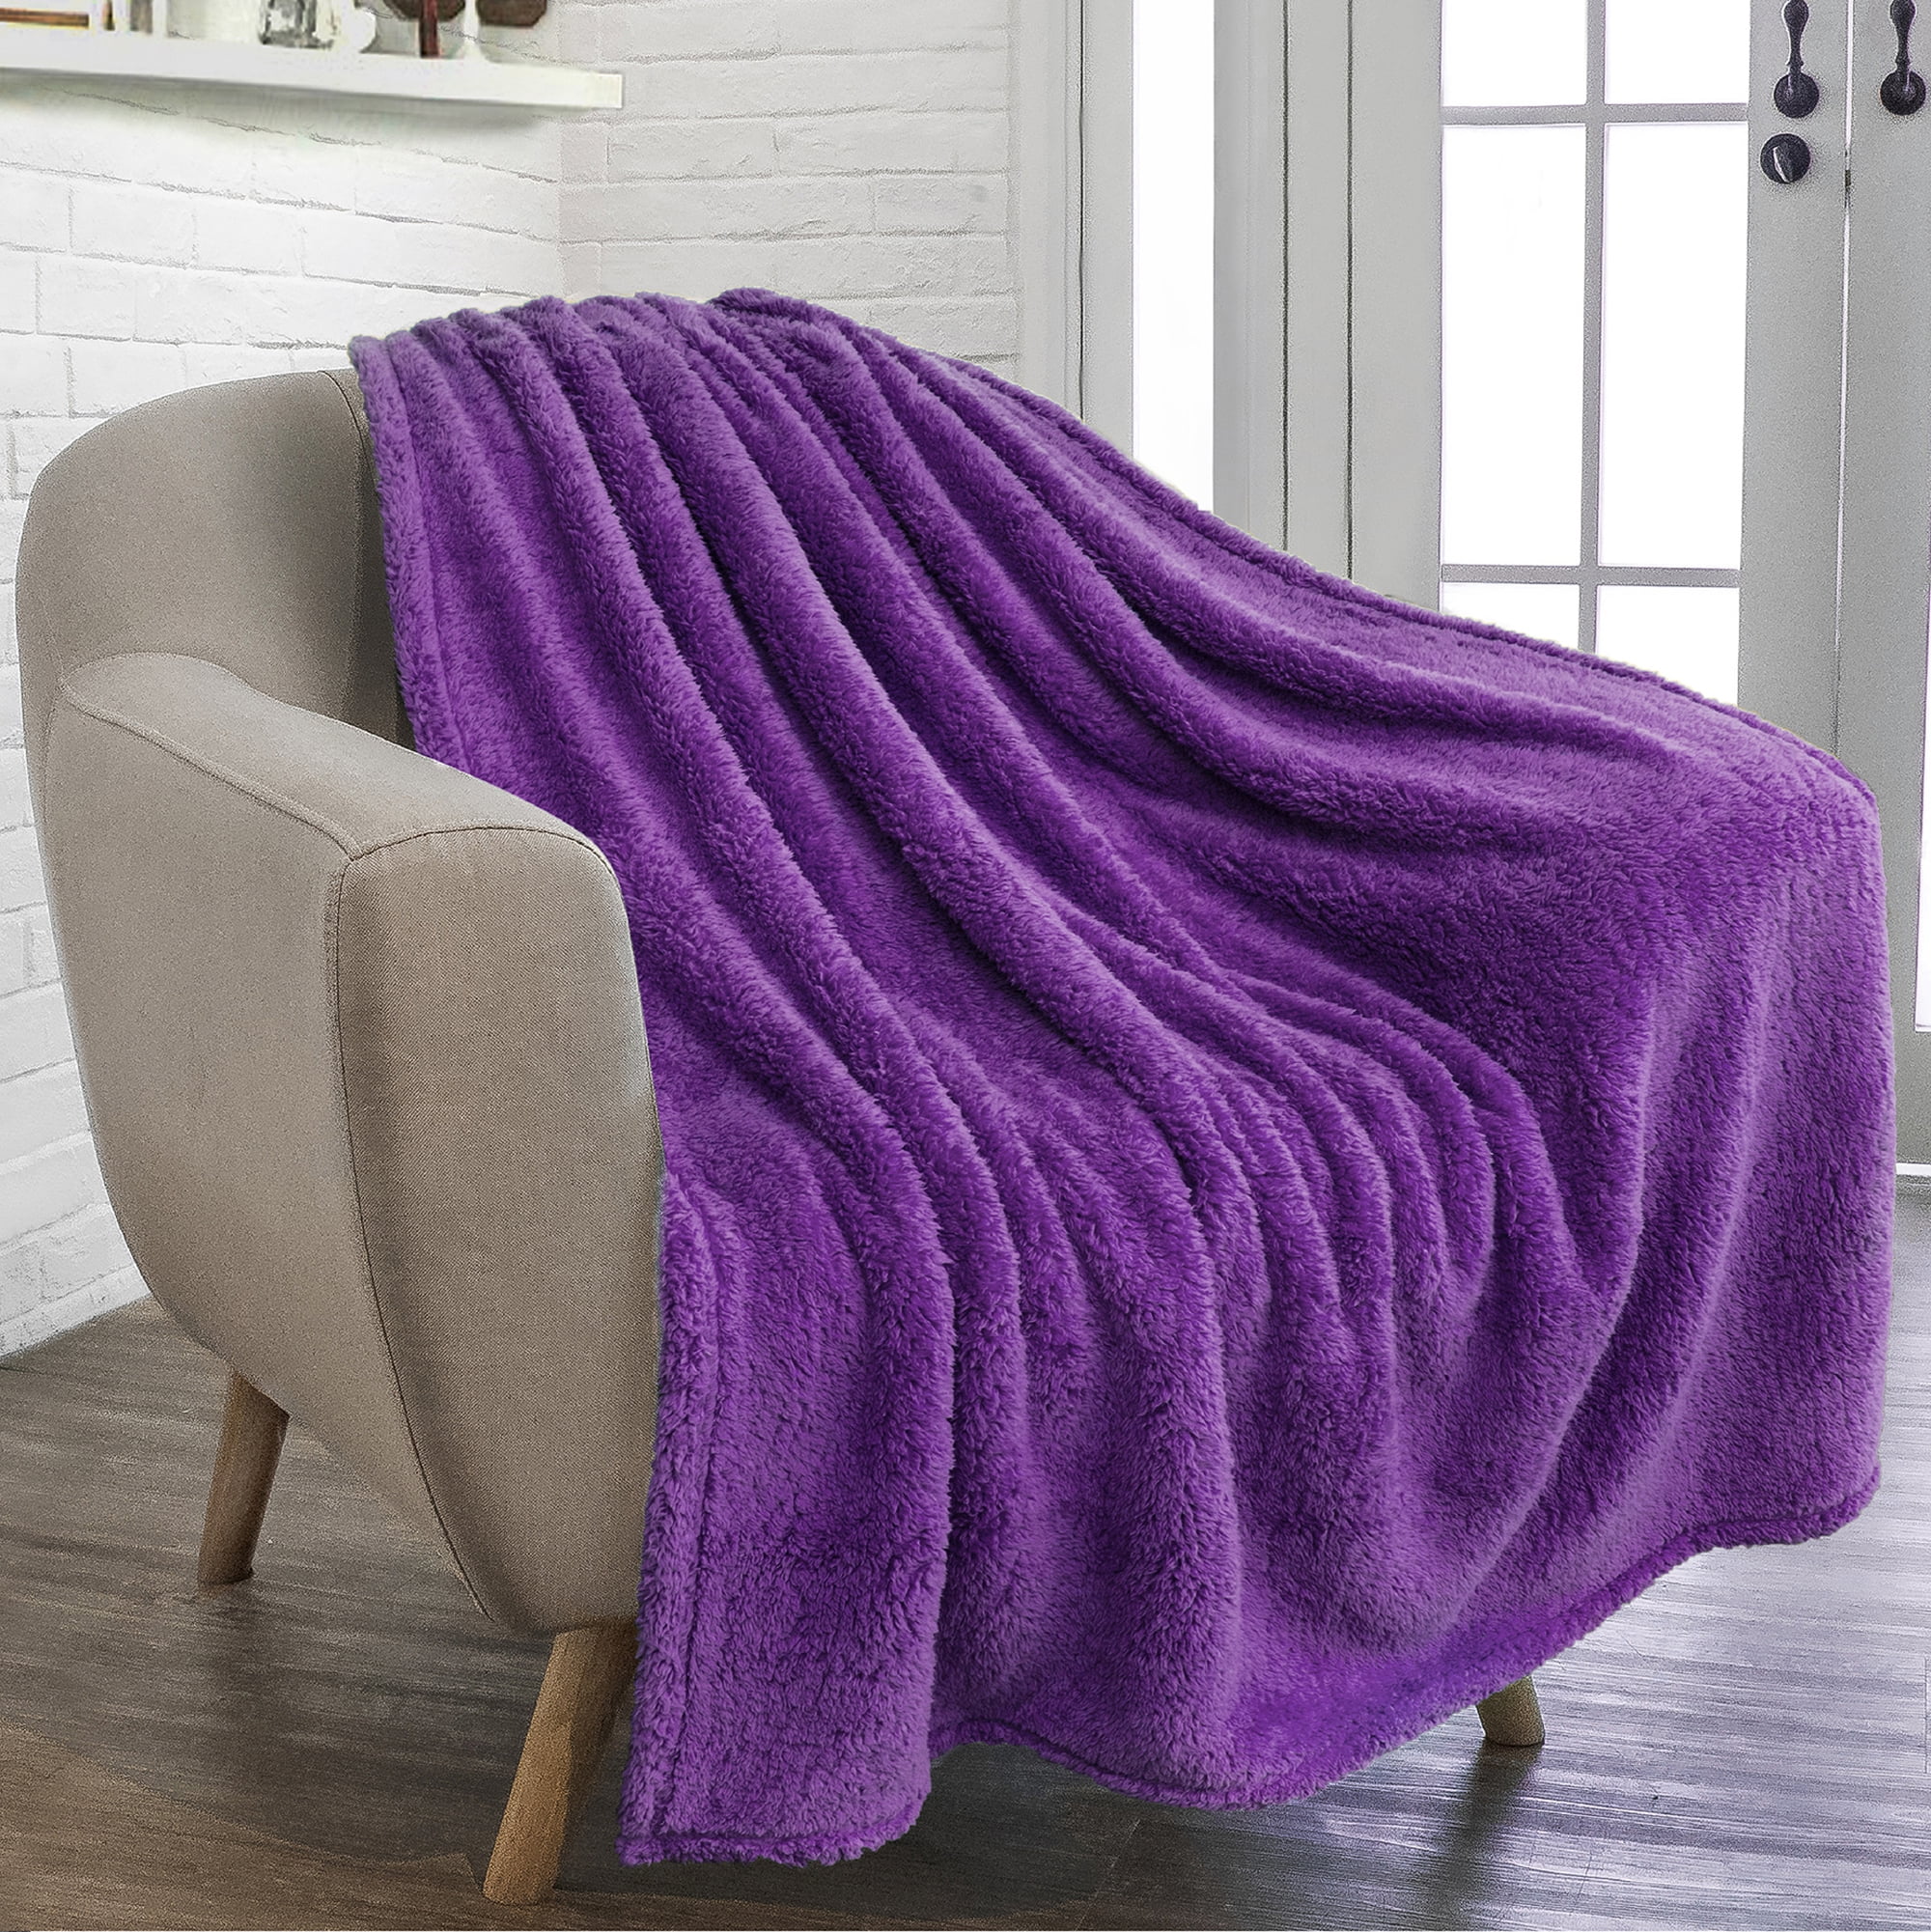 Geometricviolet Repeating Seamless Geometric and Grey Violet Sherpa Fleece Geometric- Printed Soft Cozy Lightweight Durable Plush Woven- Throw Blanket for Bedroom Living Rooms Sofa Couch I 